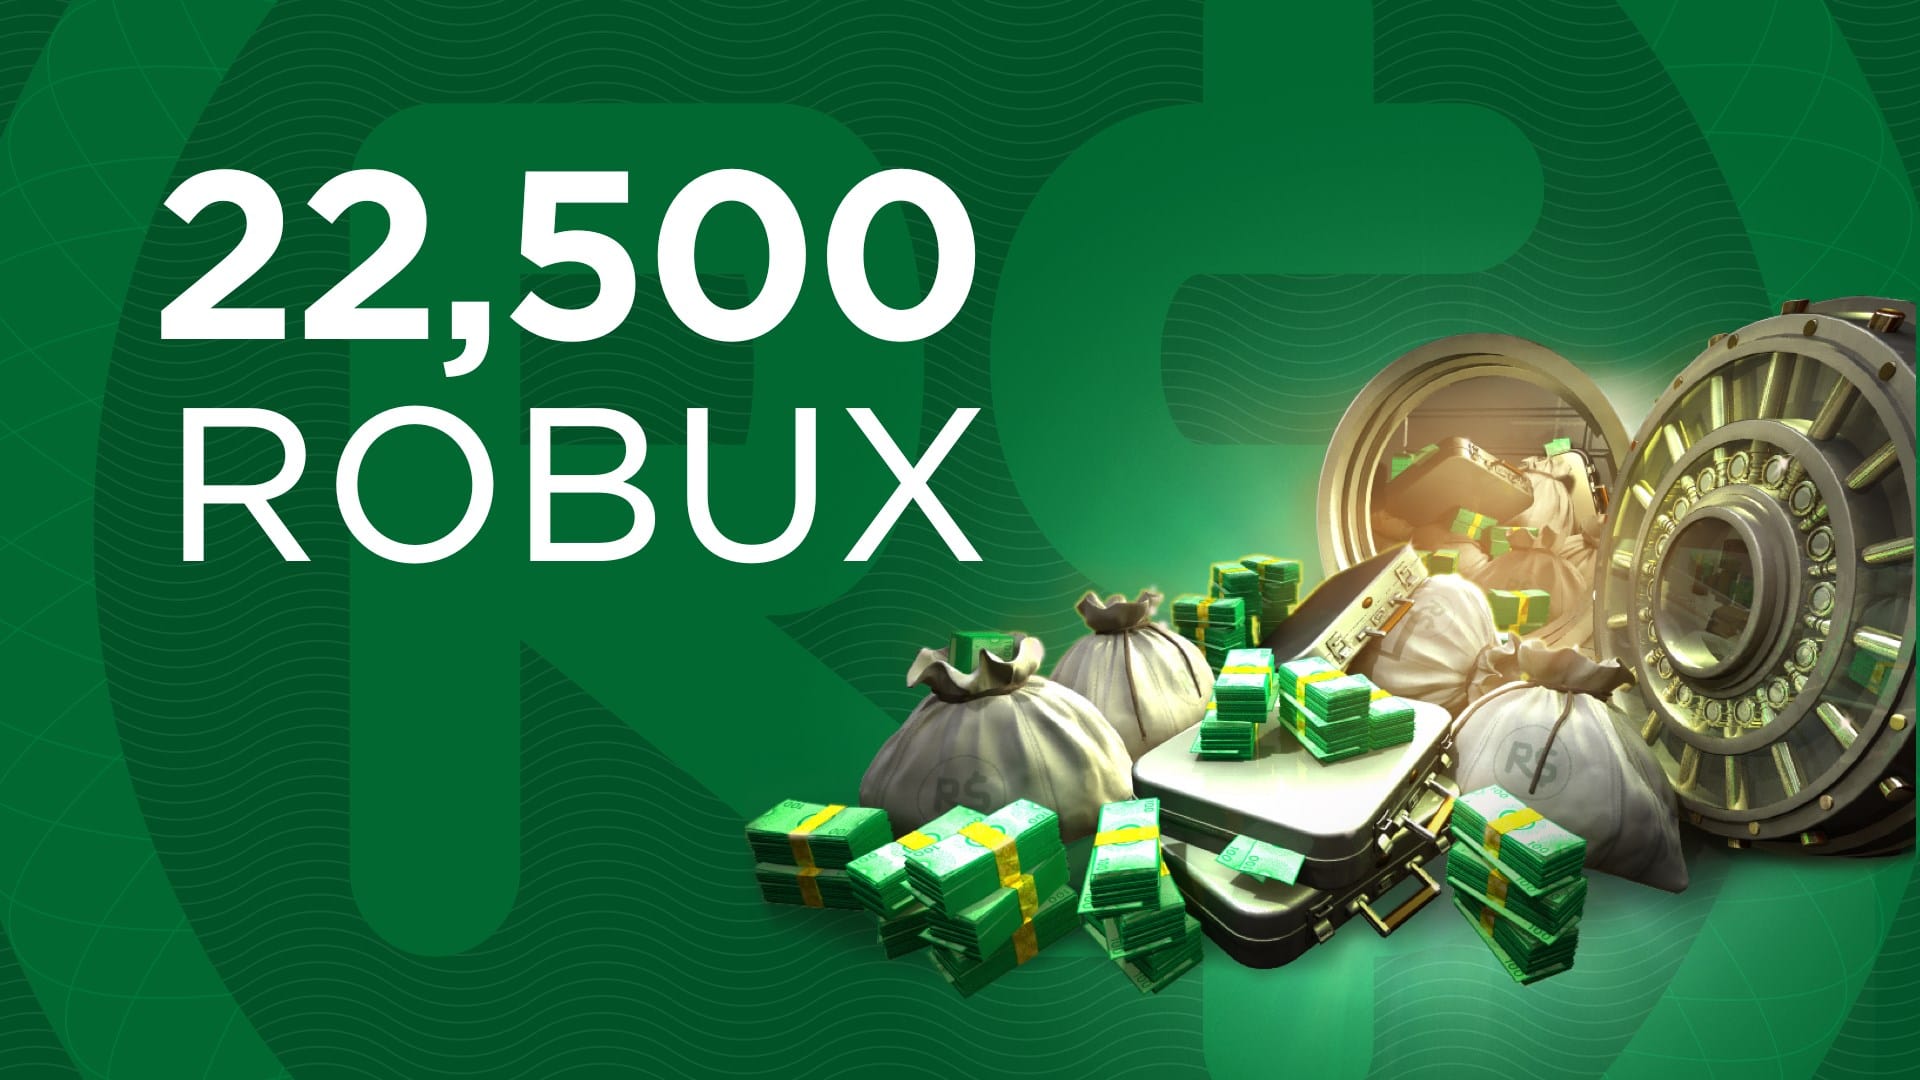 Robux Generator and Legit Ways to Earn Free Robux in 2019